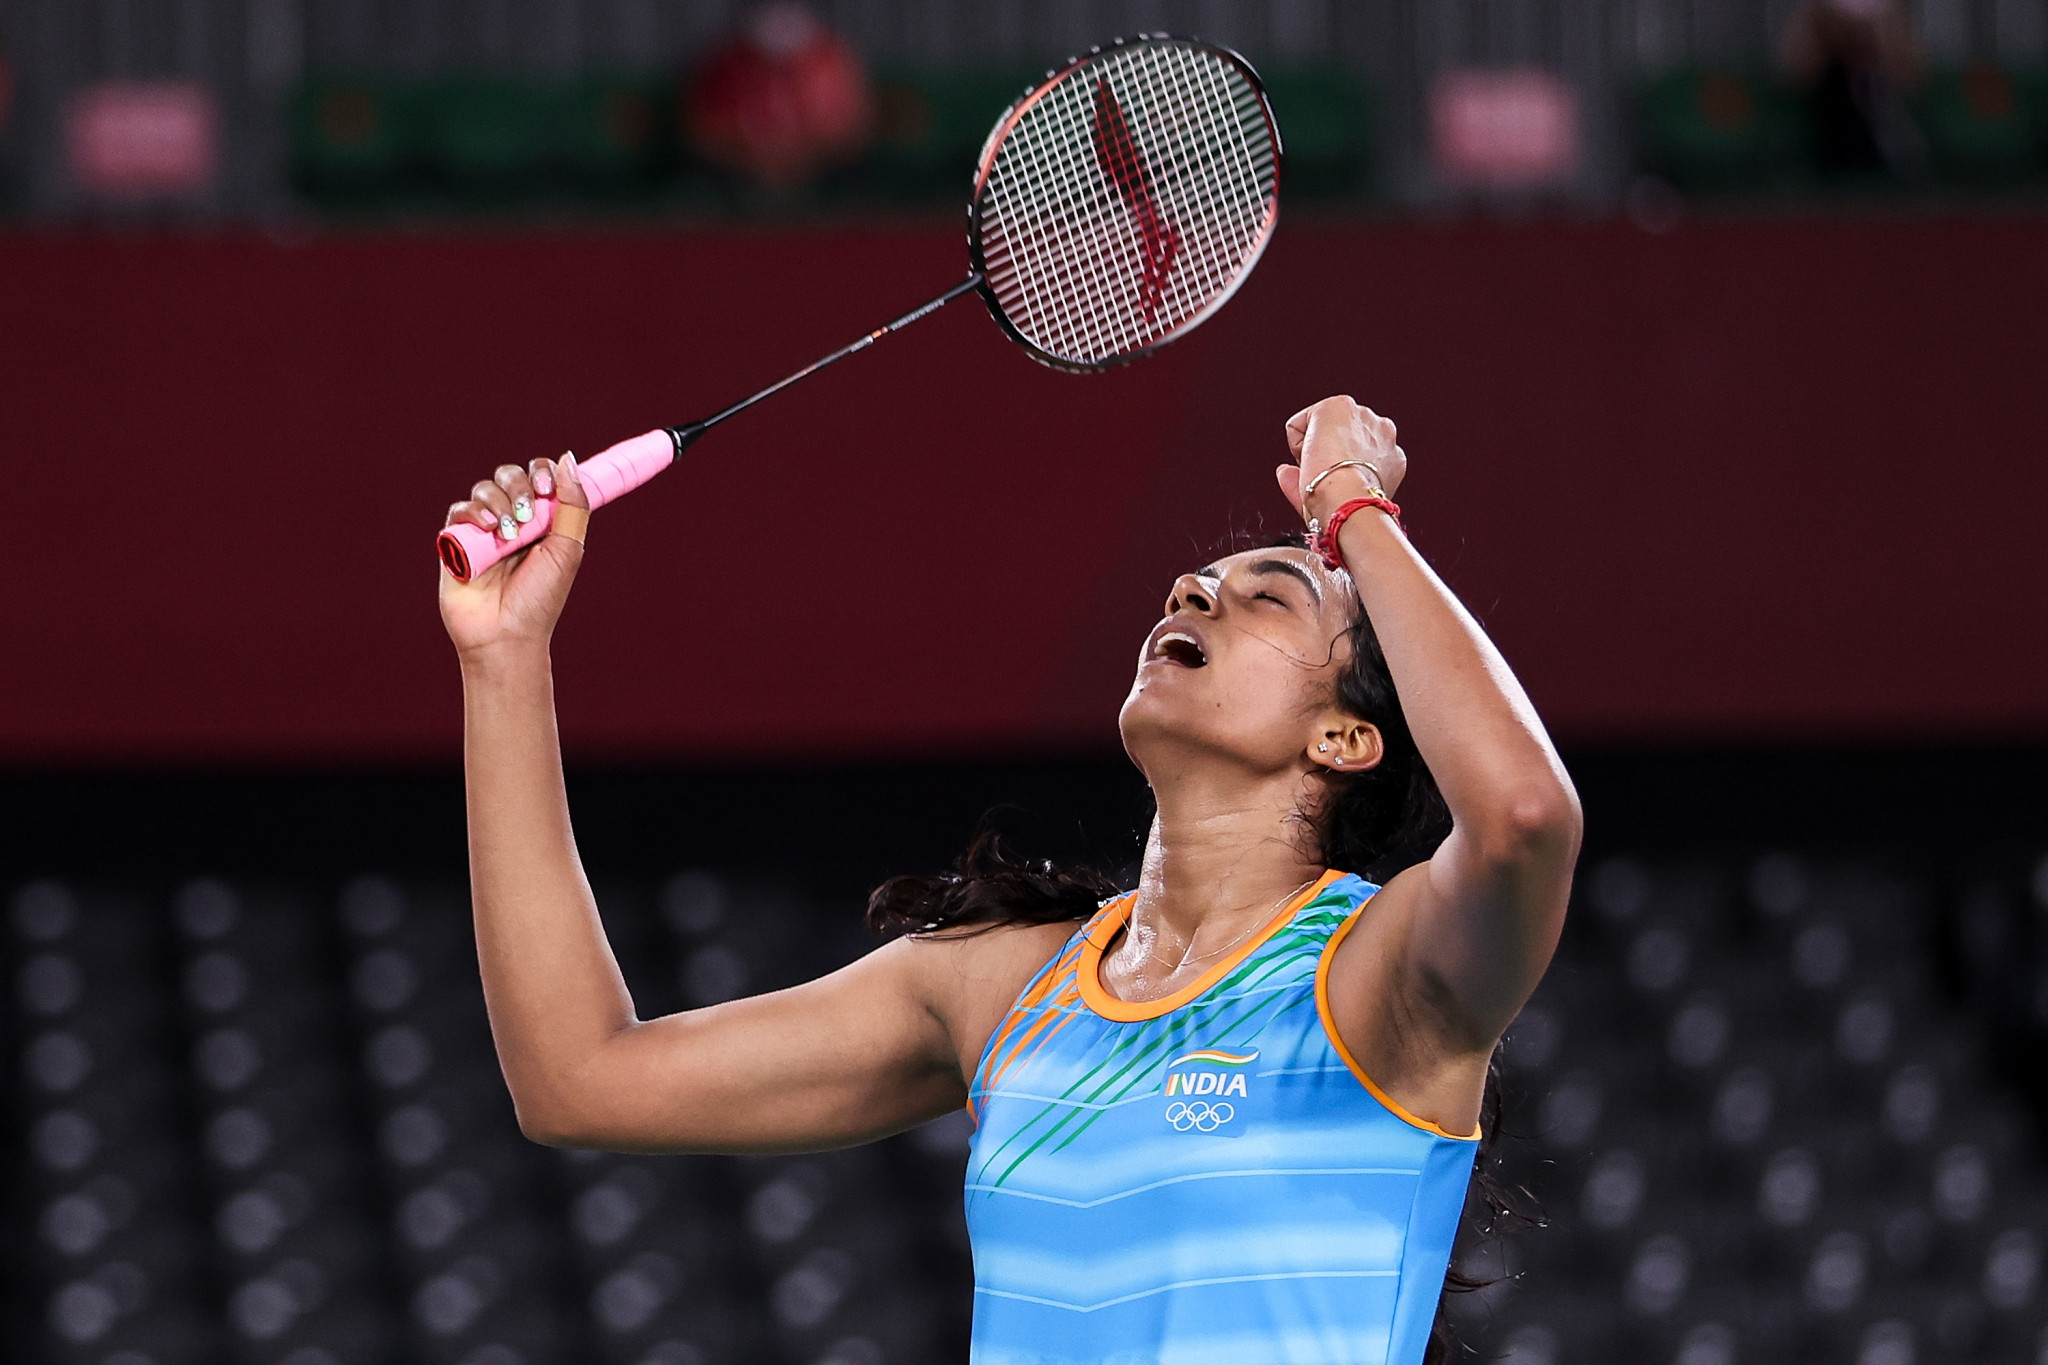 PV Sindhu is into the women's singles semi-finals at the Badminton Asia Championships ©Getty Images 